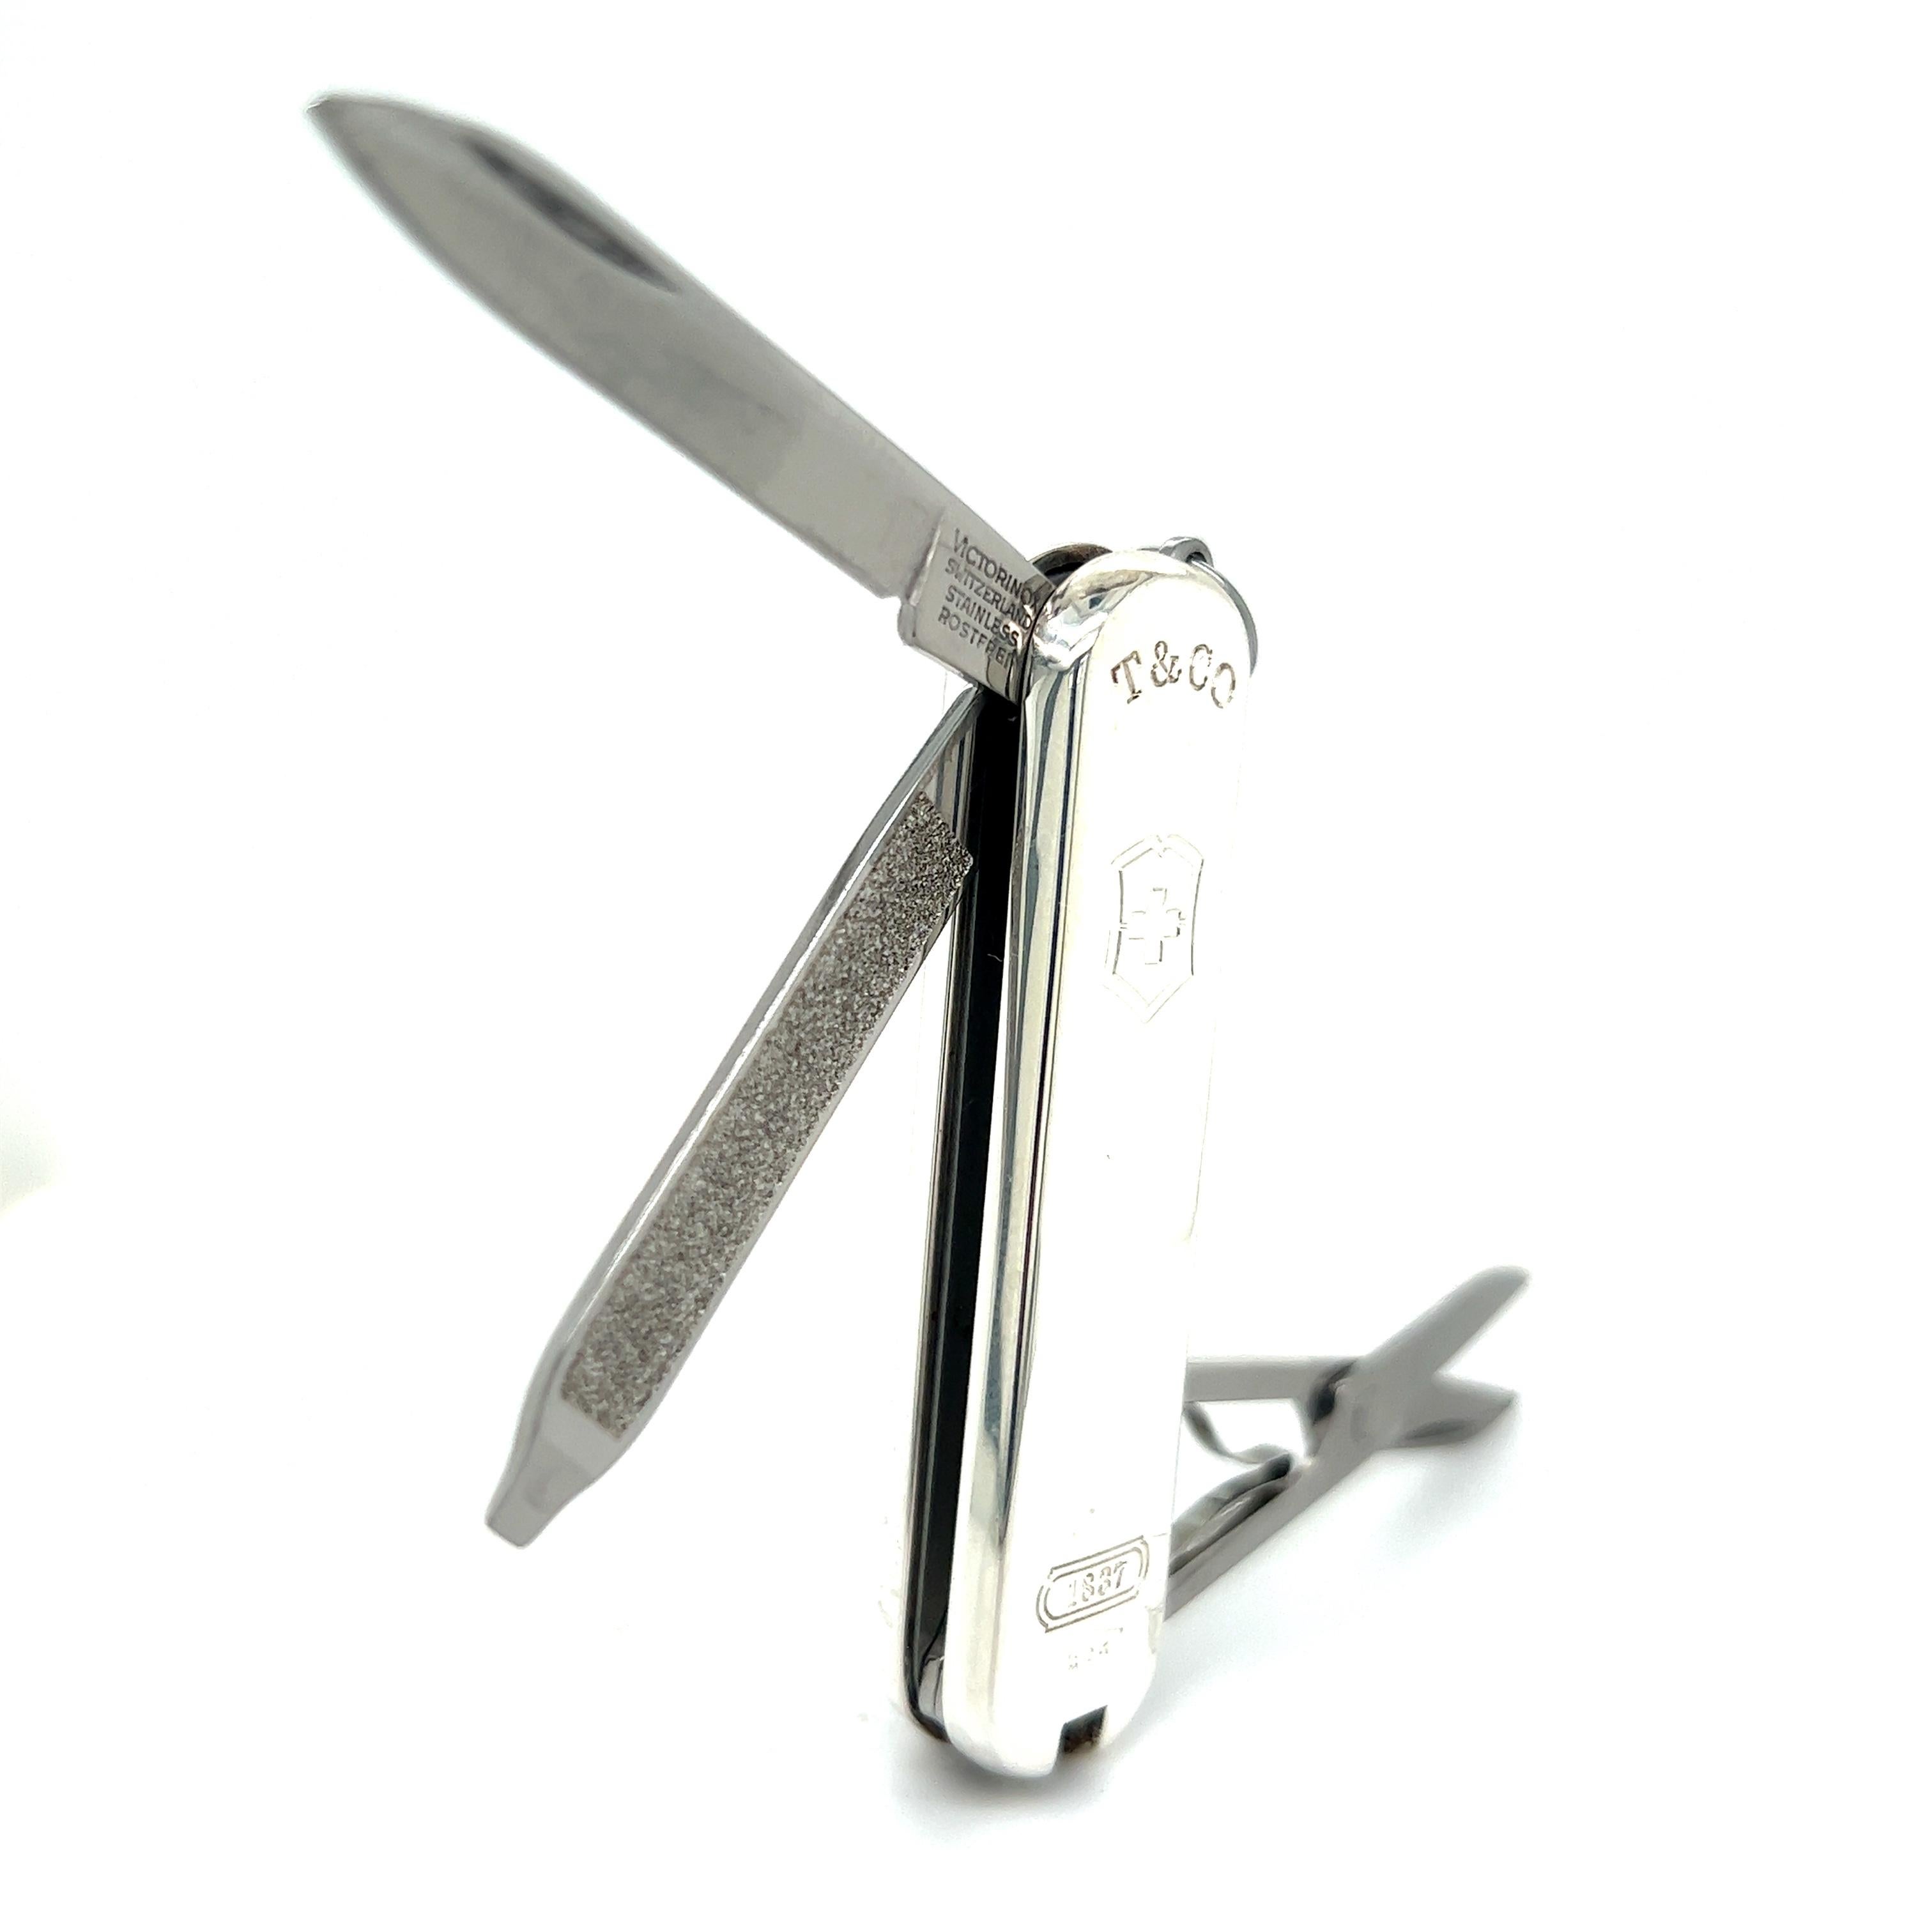 Tiffany & Co Authentic Estate Swiss Army Pocket Knife Silver TIF426

This elegant Authentic Tiffany & Co pocket knife is made of sterling silver and has a weight of 45 Grams.

TRUSTED SELLER SINCE 2002

PLEASE SEE OUR HUNDREDS OF POSITIVE FEEDBACKS